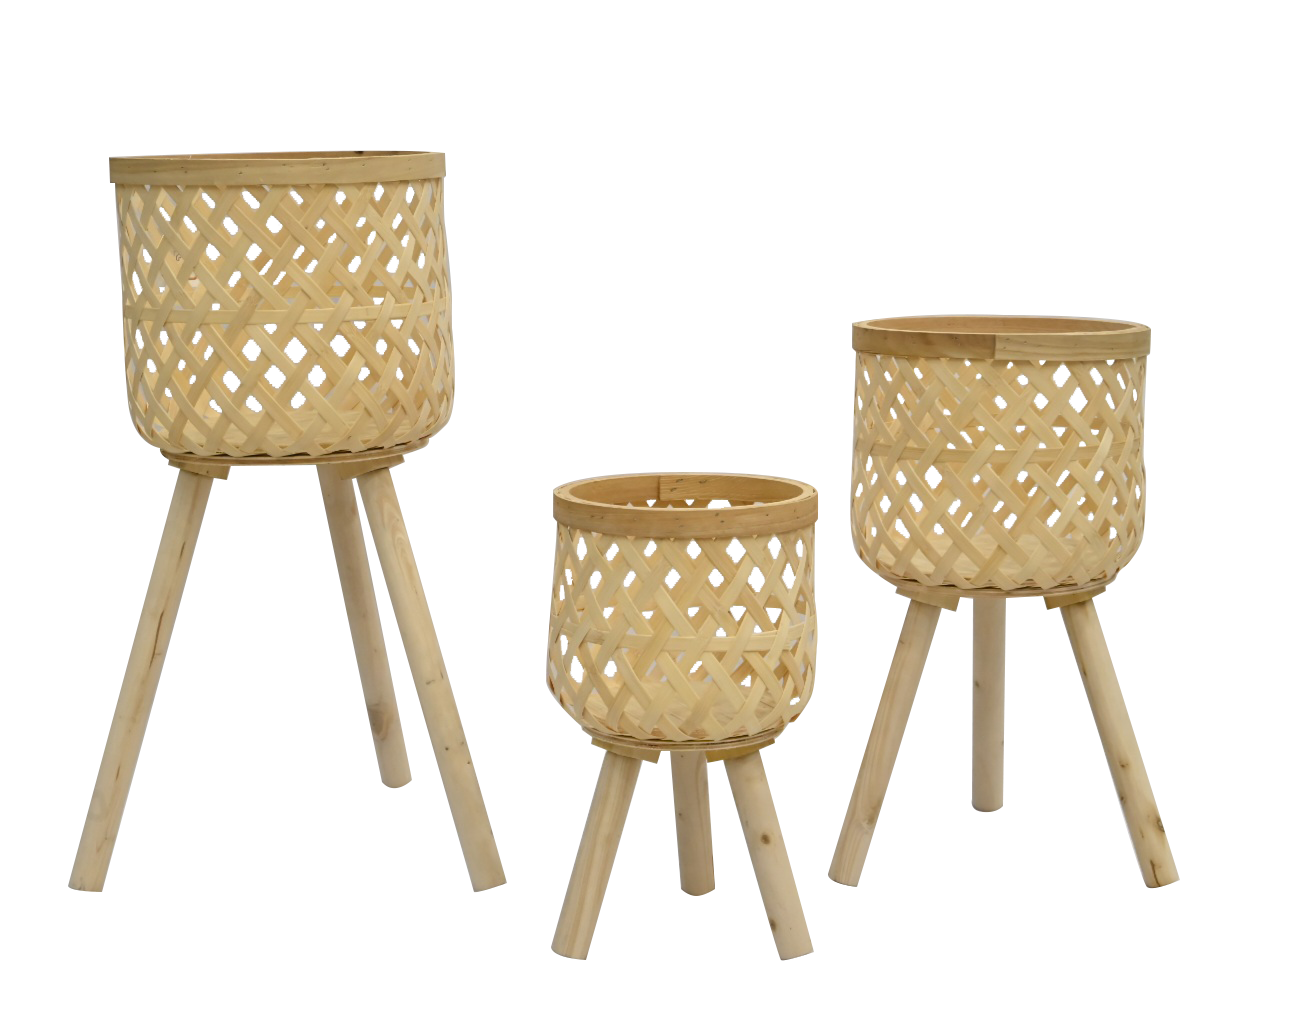 Woven Bamboo Floor Baskets with Wood Legs (3 Pcs Set)